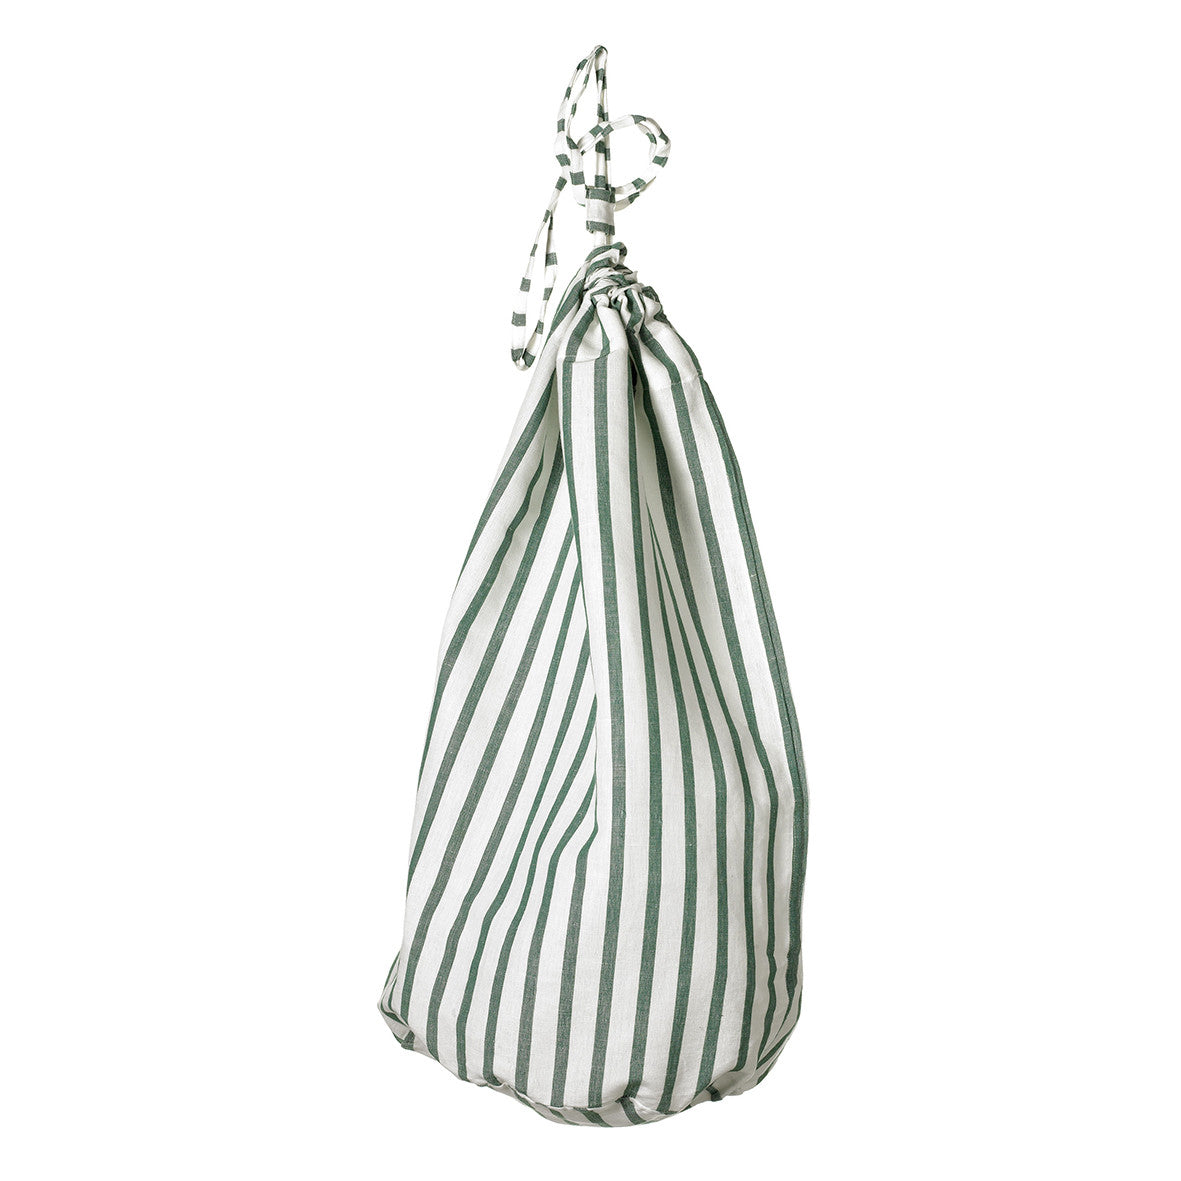 Autumn Ticking Stripe Cotton Linen Drawstring Laundry and Storage bags Dark Moss Green ships from Canada (USA)